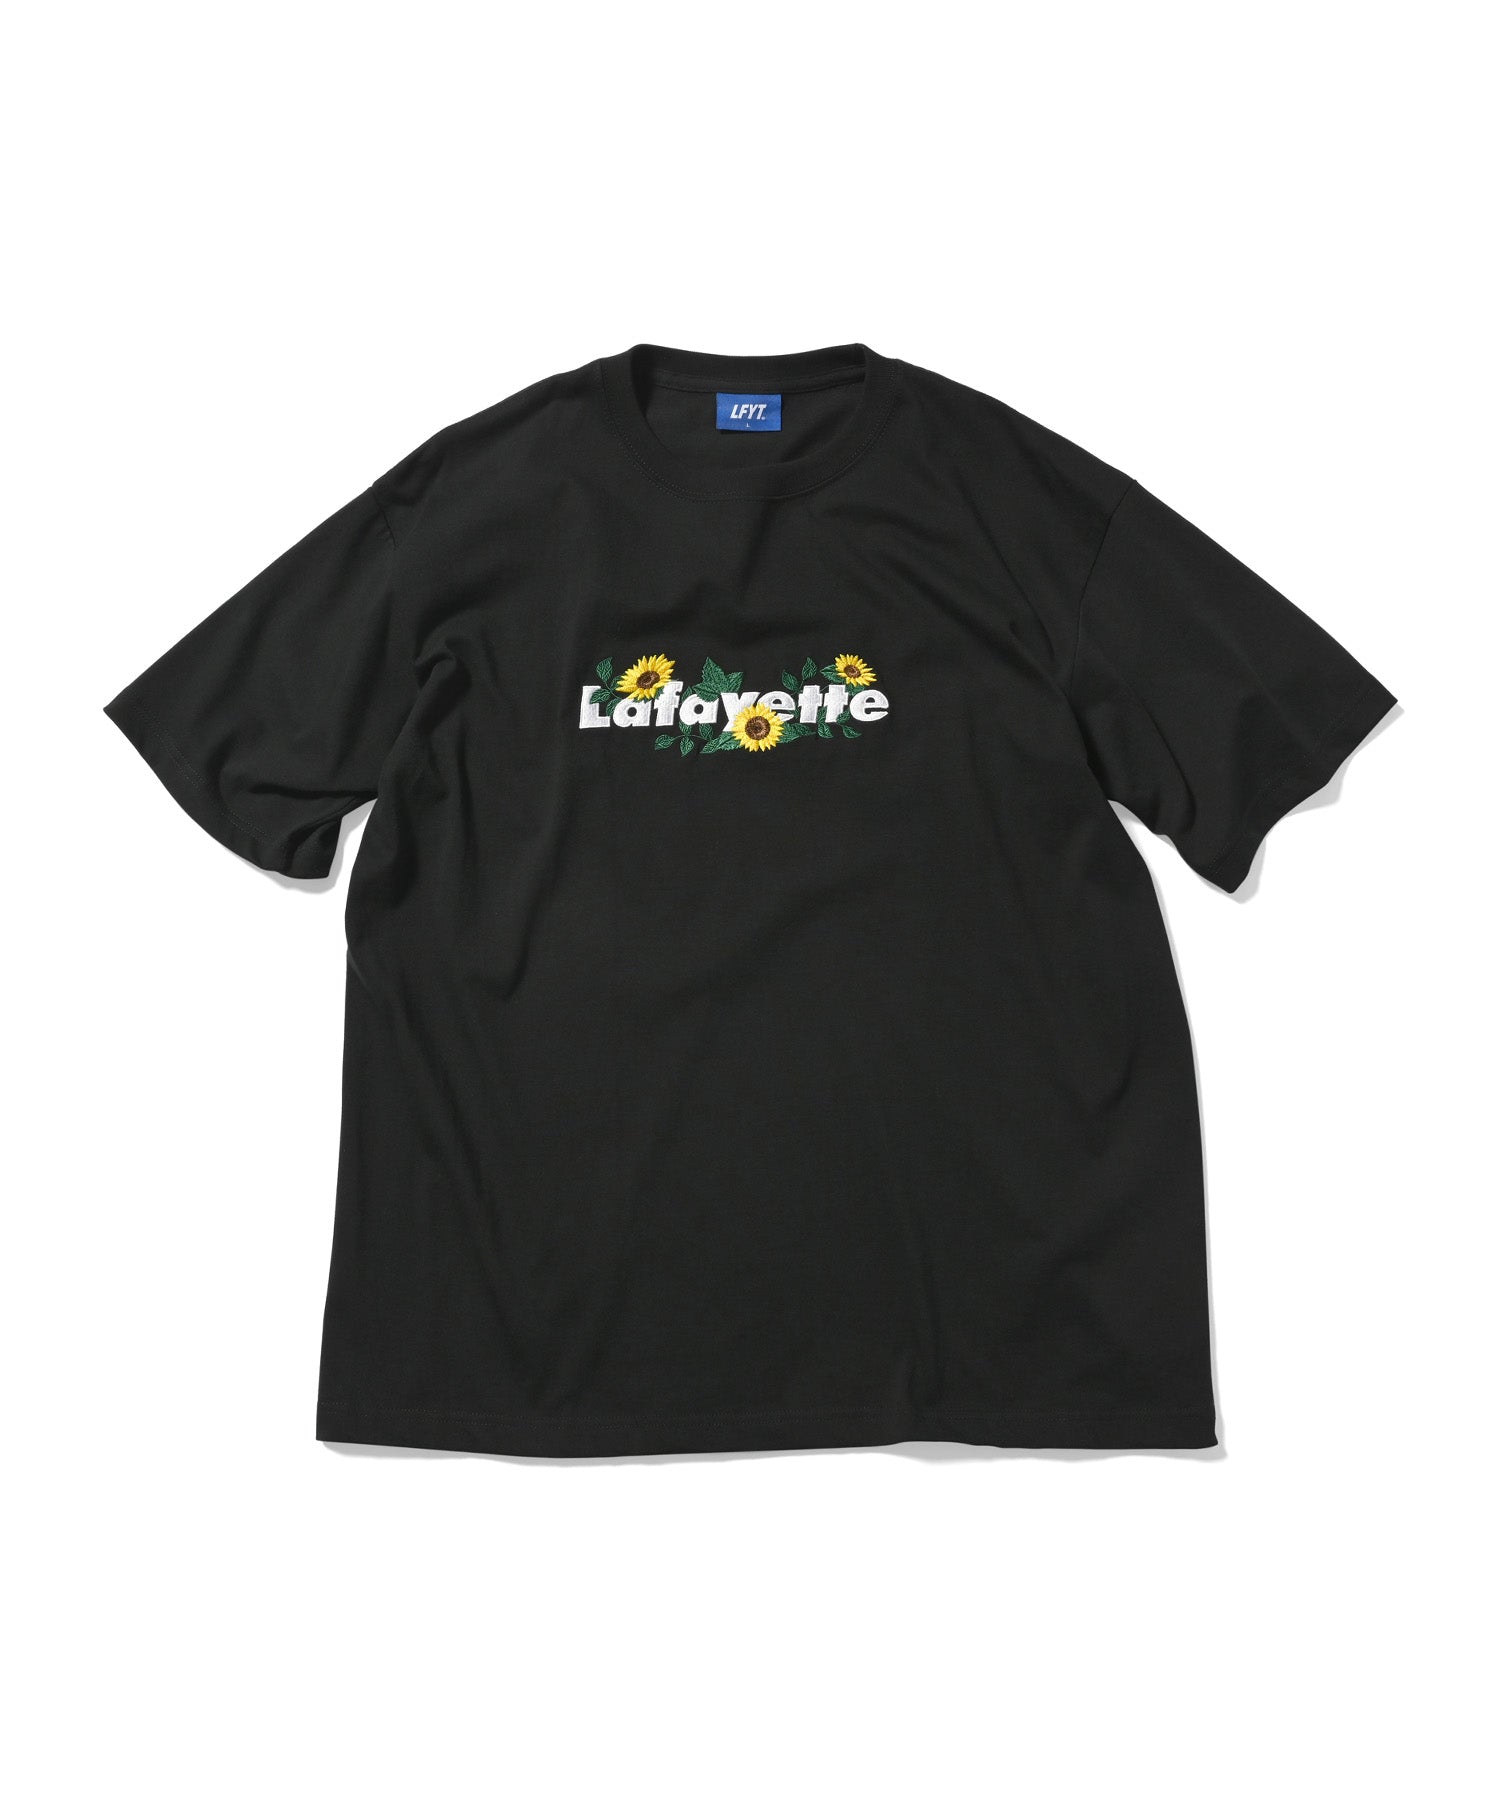 LFYT SUNFLOWER Lafayette LOGO TEE "directed by YUUMI" LE230128